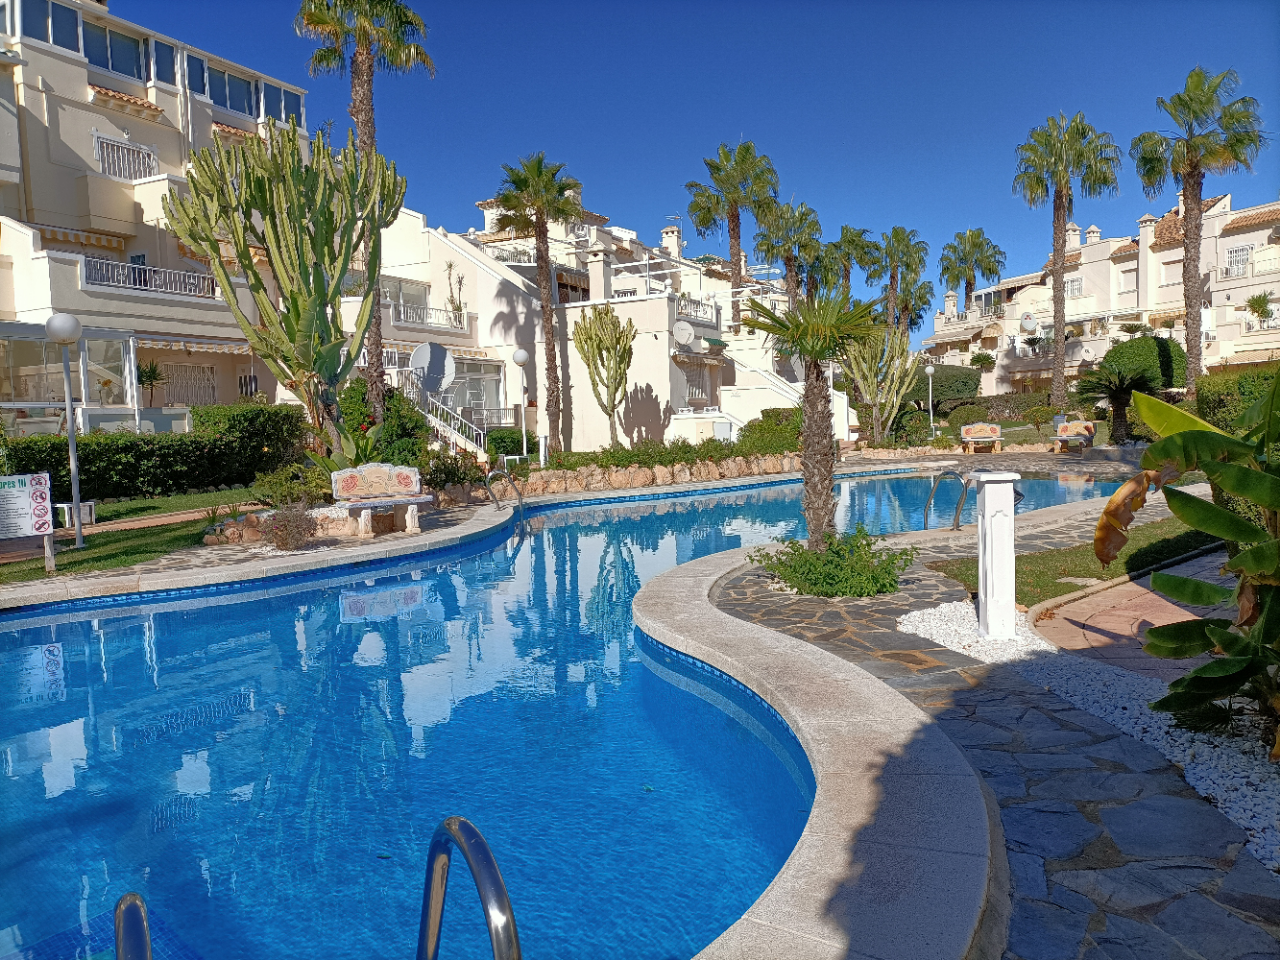 Spain – Costa Blanca, Playa Flamenca, beautiful apartment in the middle of a tropical pool area